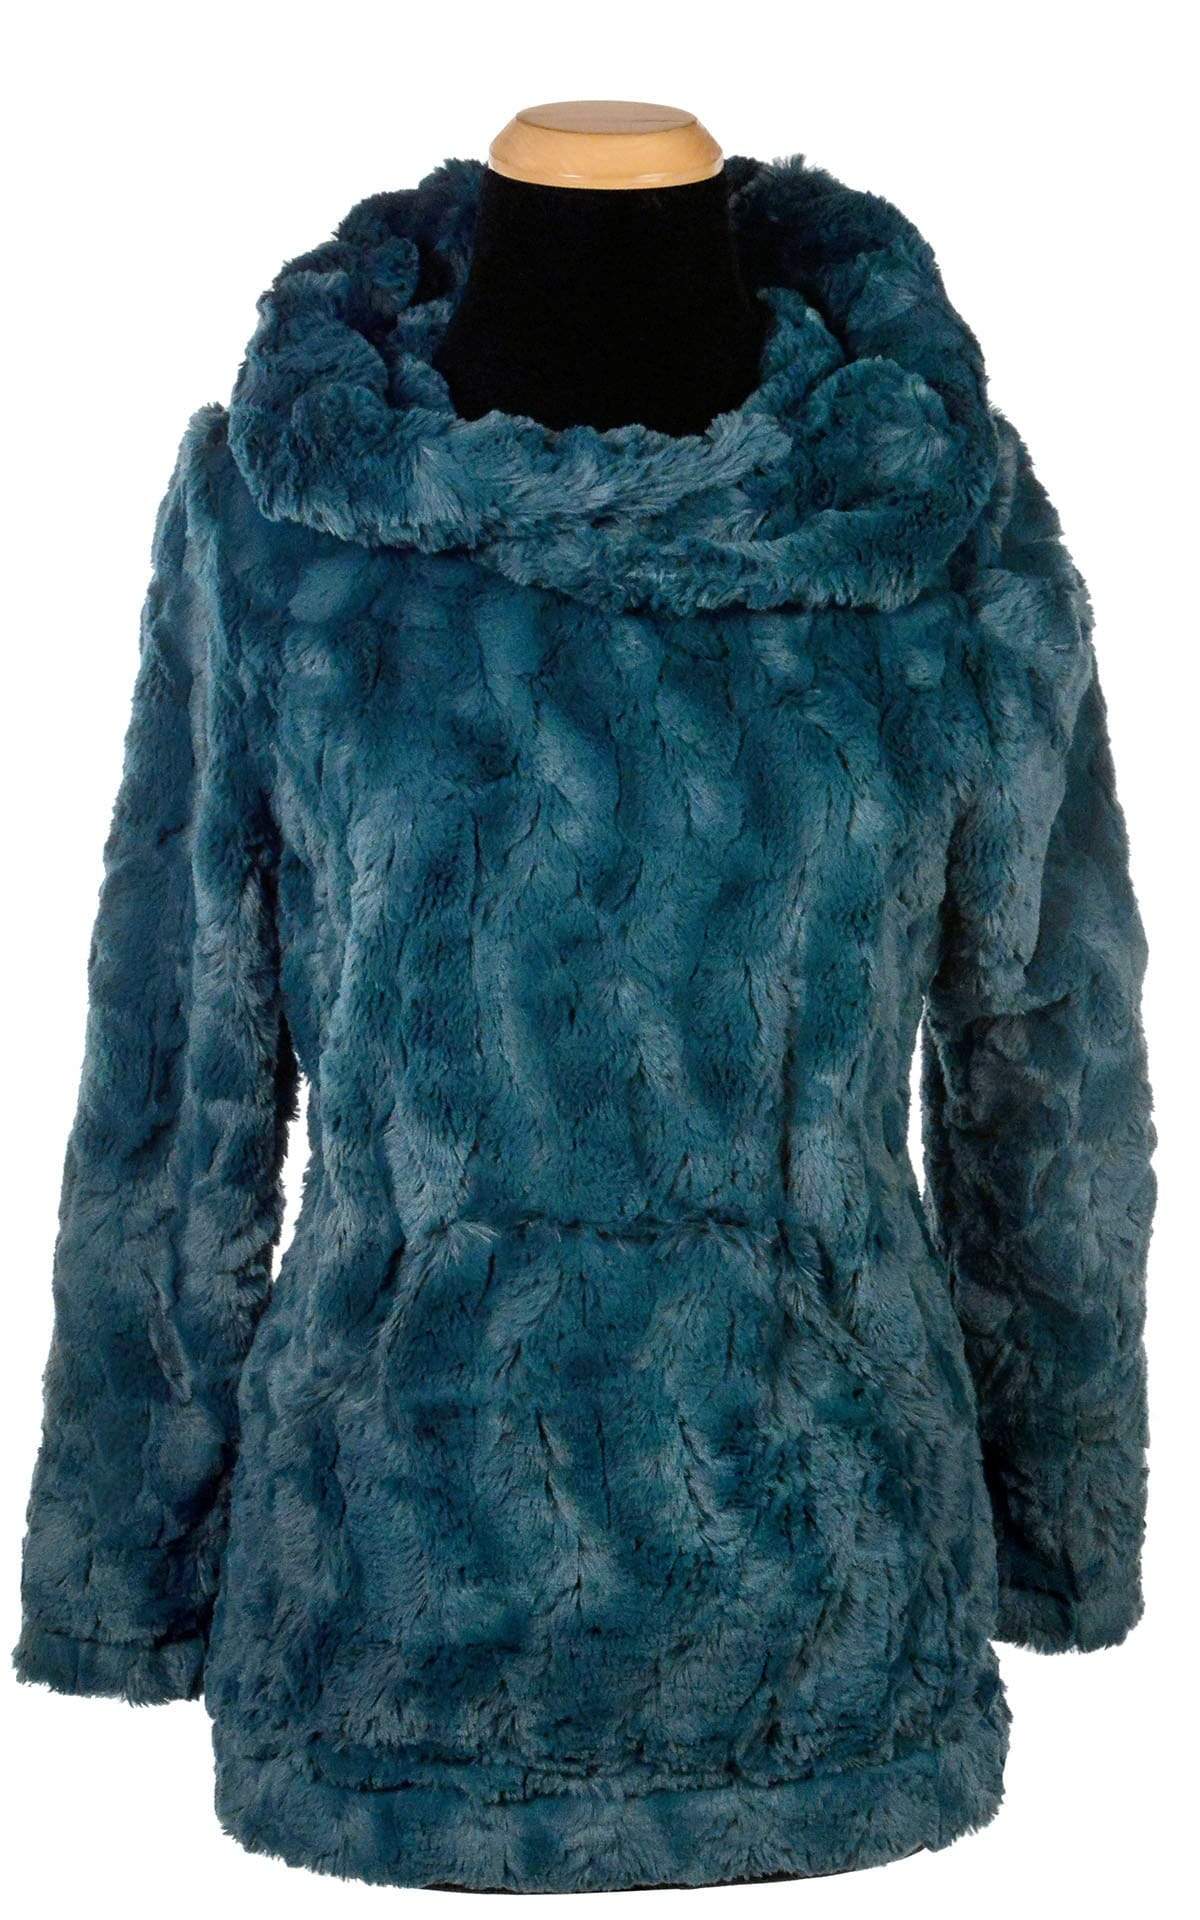 Hooded Lounger with Hood Down | Peacock Pond Faux Fur | Pandemonium Millinery USA